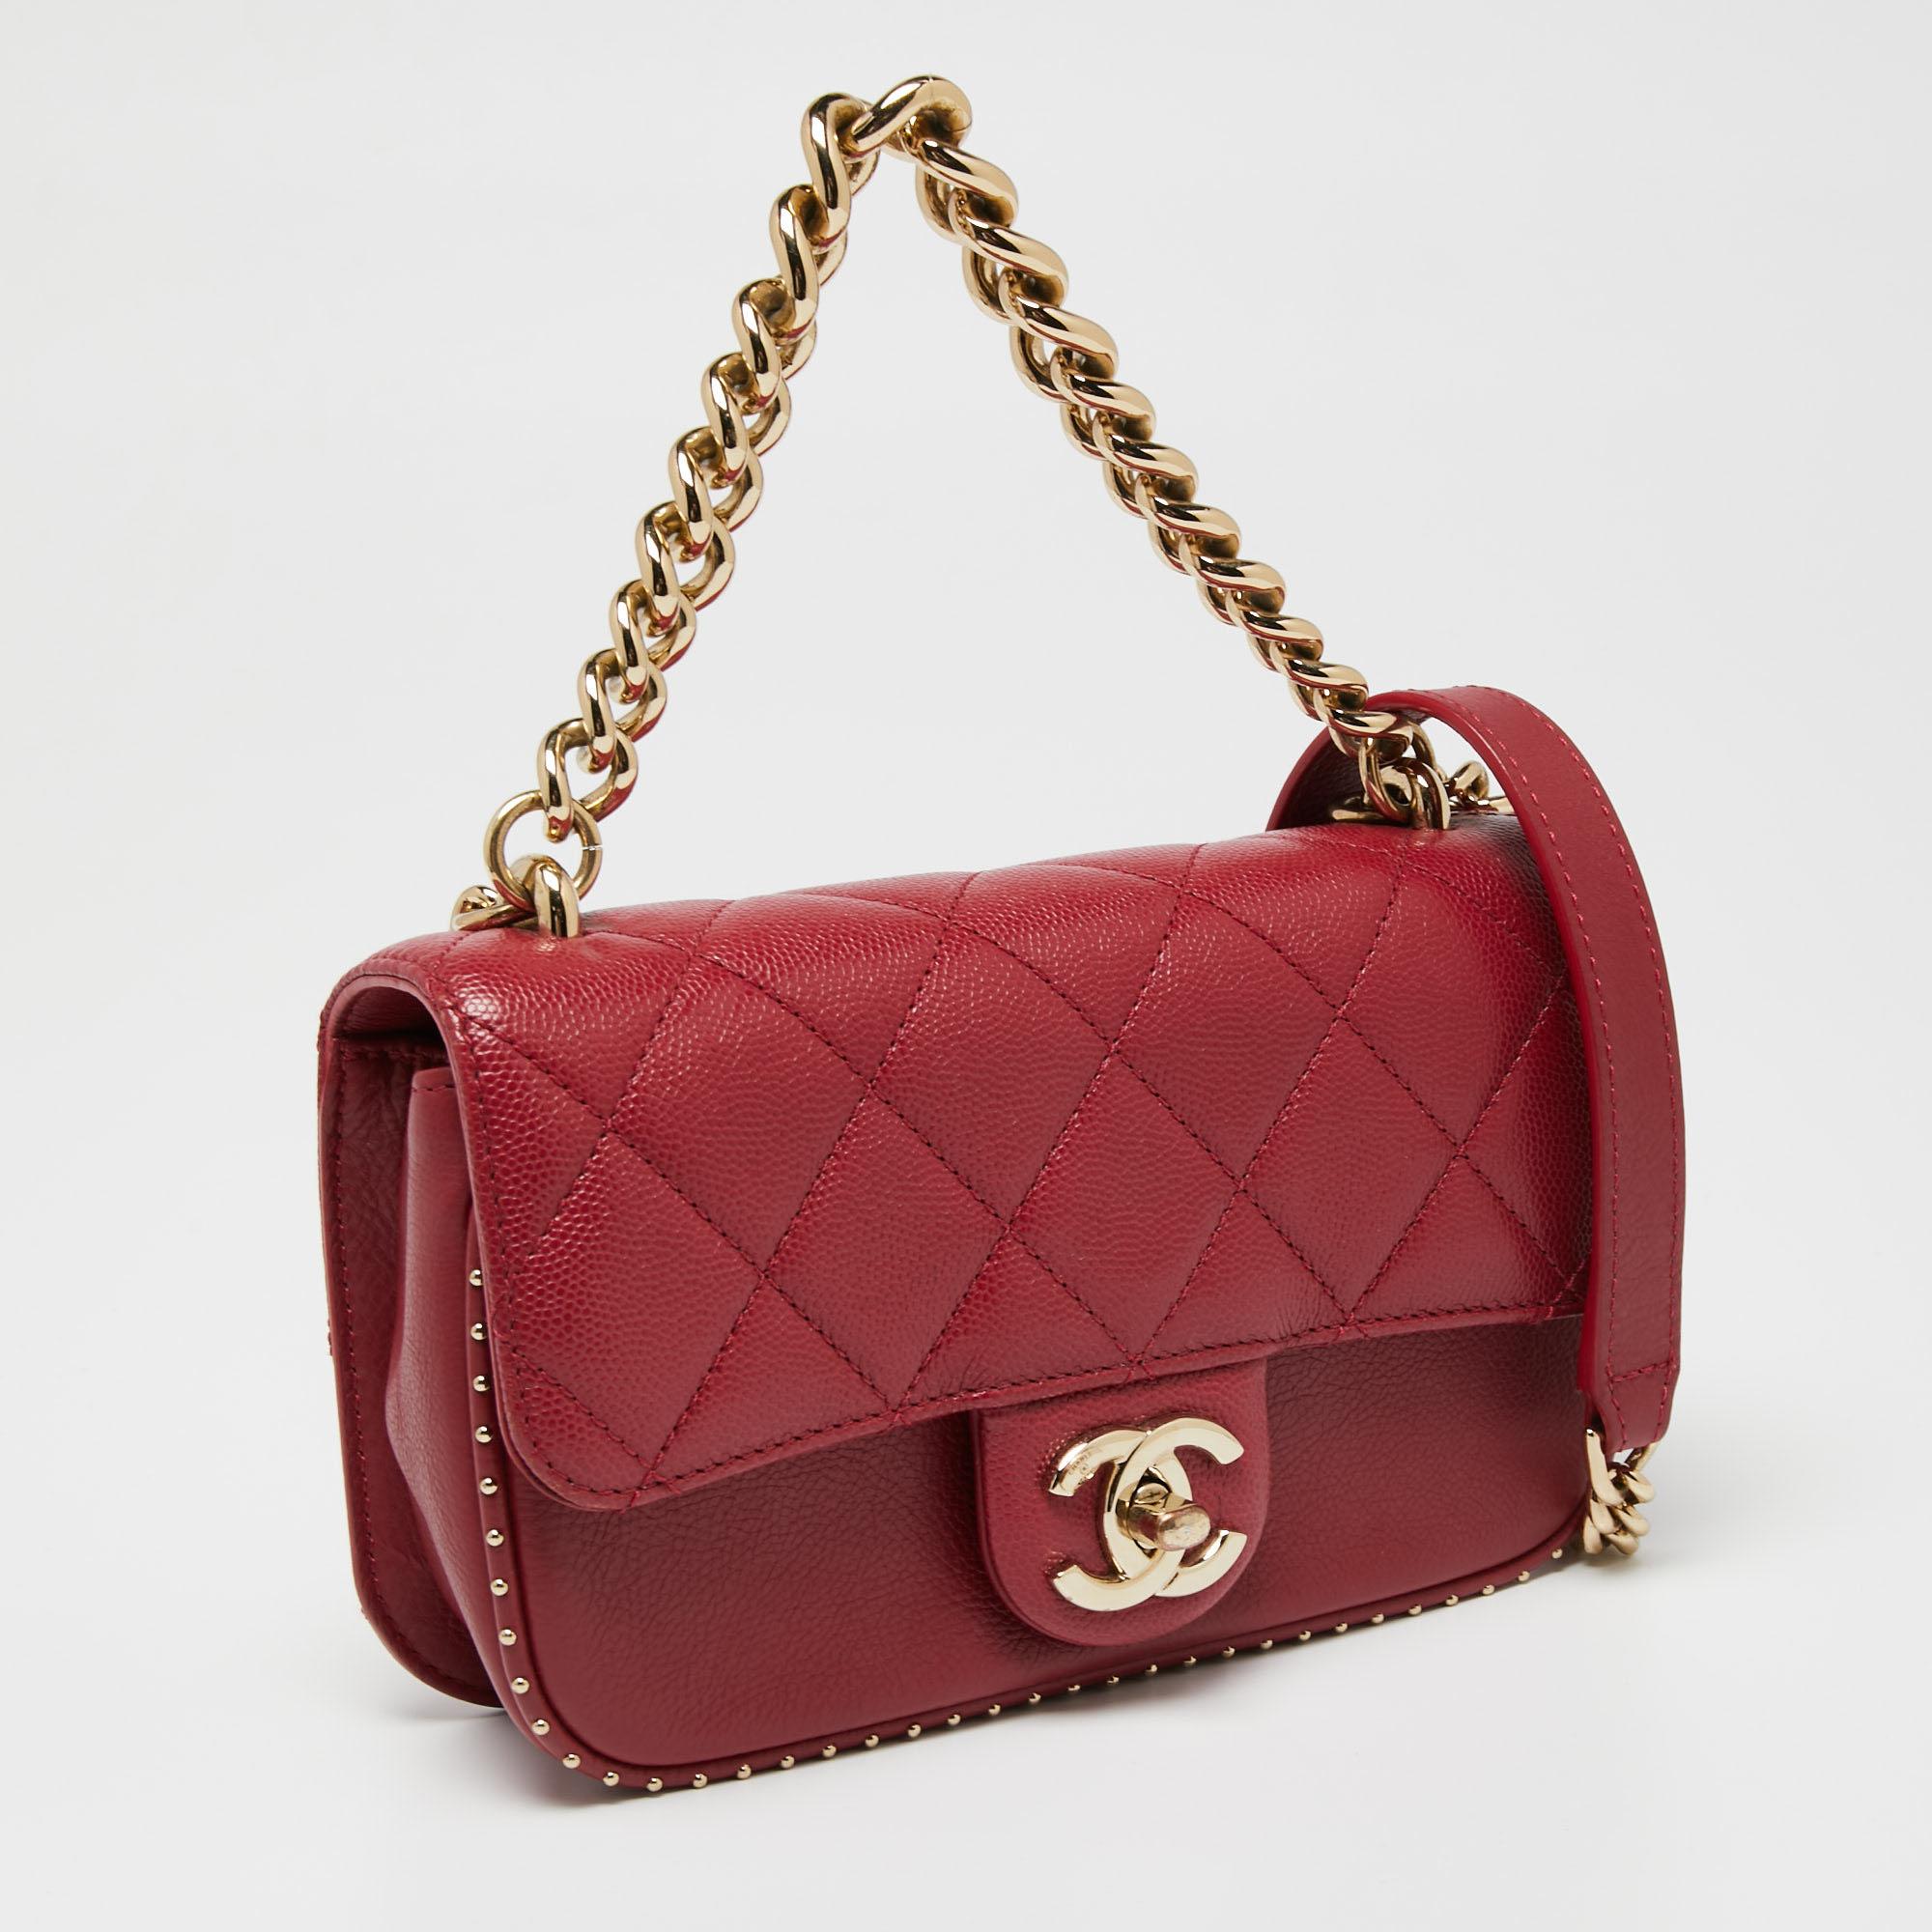 Brown Chanel Cherry Red Caviar Quilted Leather Small Studded Flap Bag